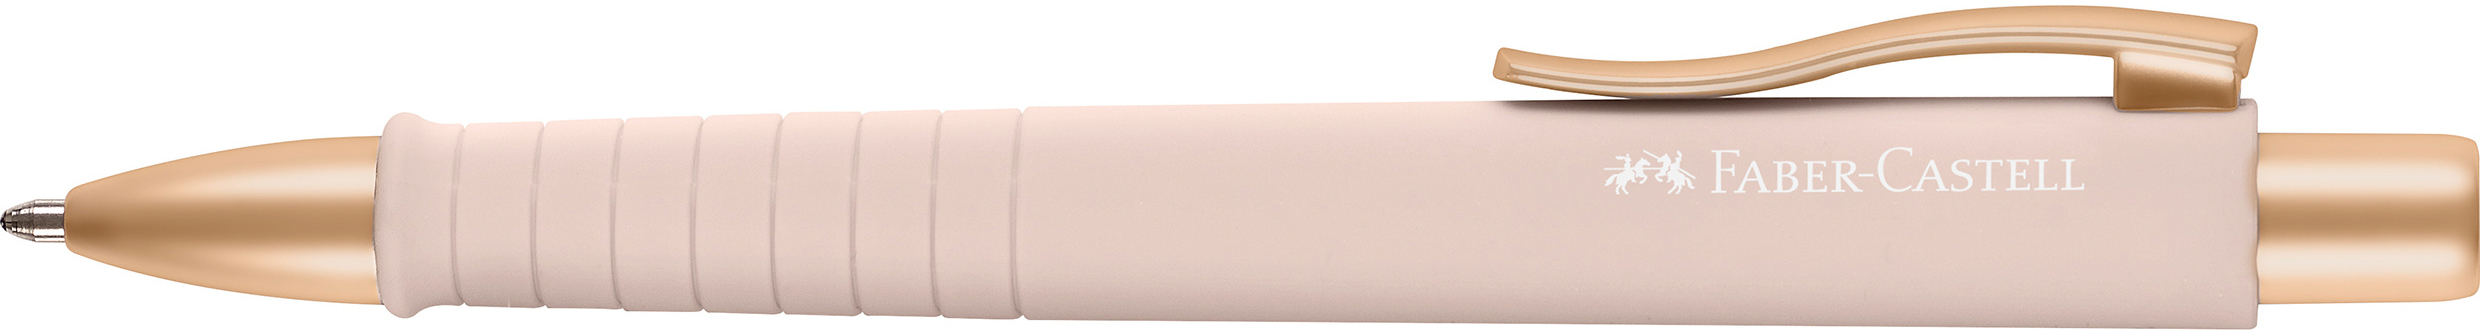 FABER-CASTELL Stylo à bille Poly Ball XB 241187 Urban pale rose